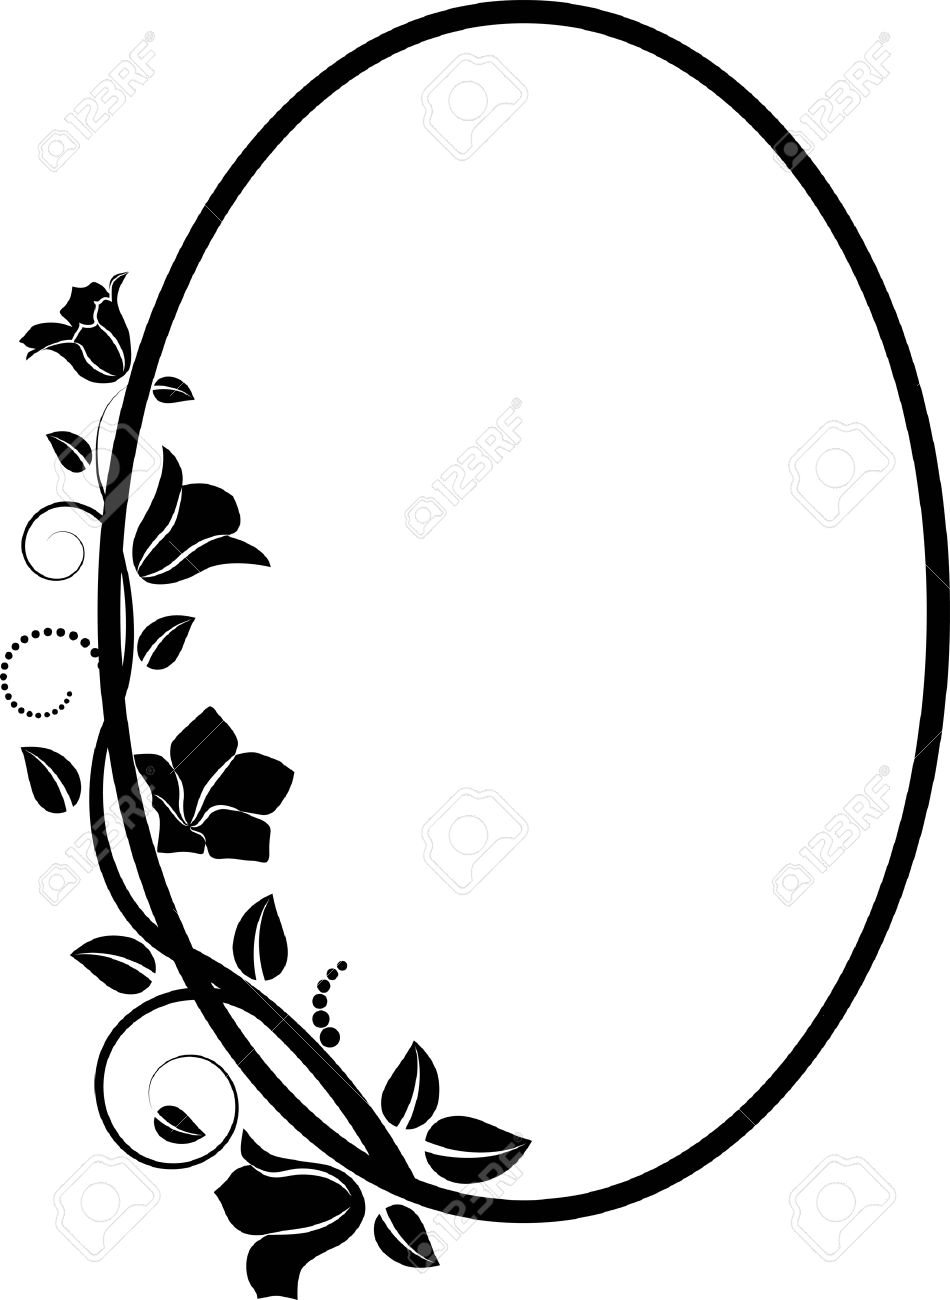 Download oval outline border clipart 20 free Cliparts | Download ...